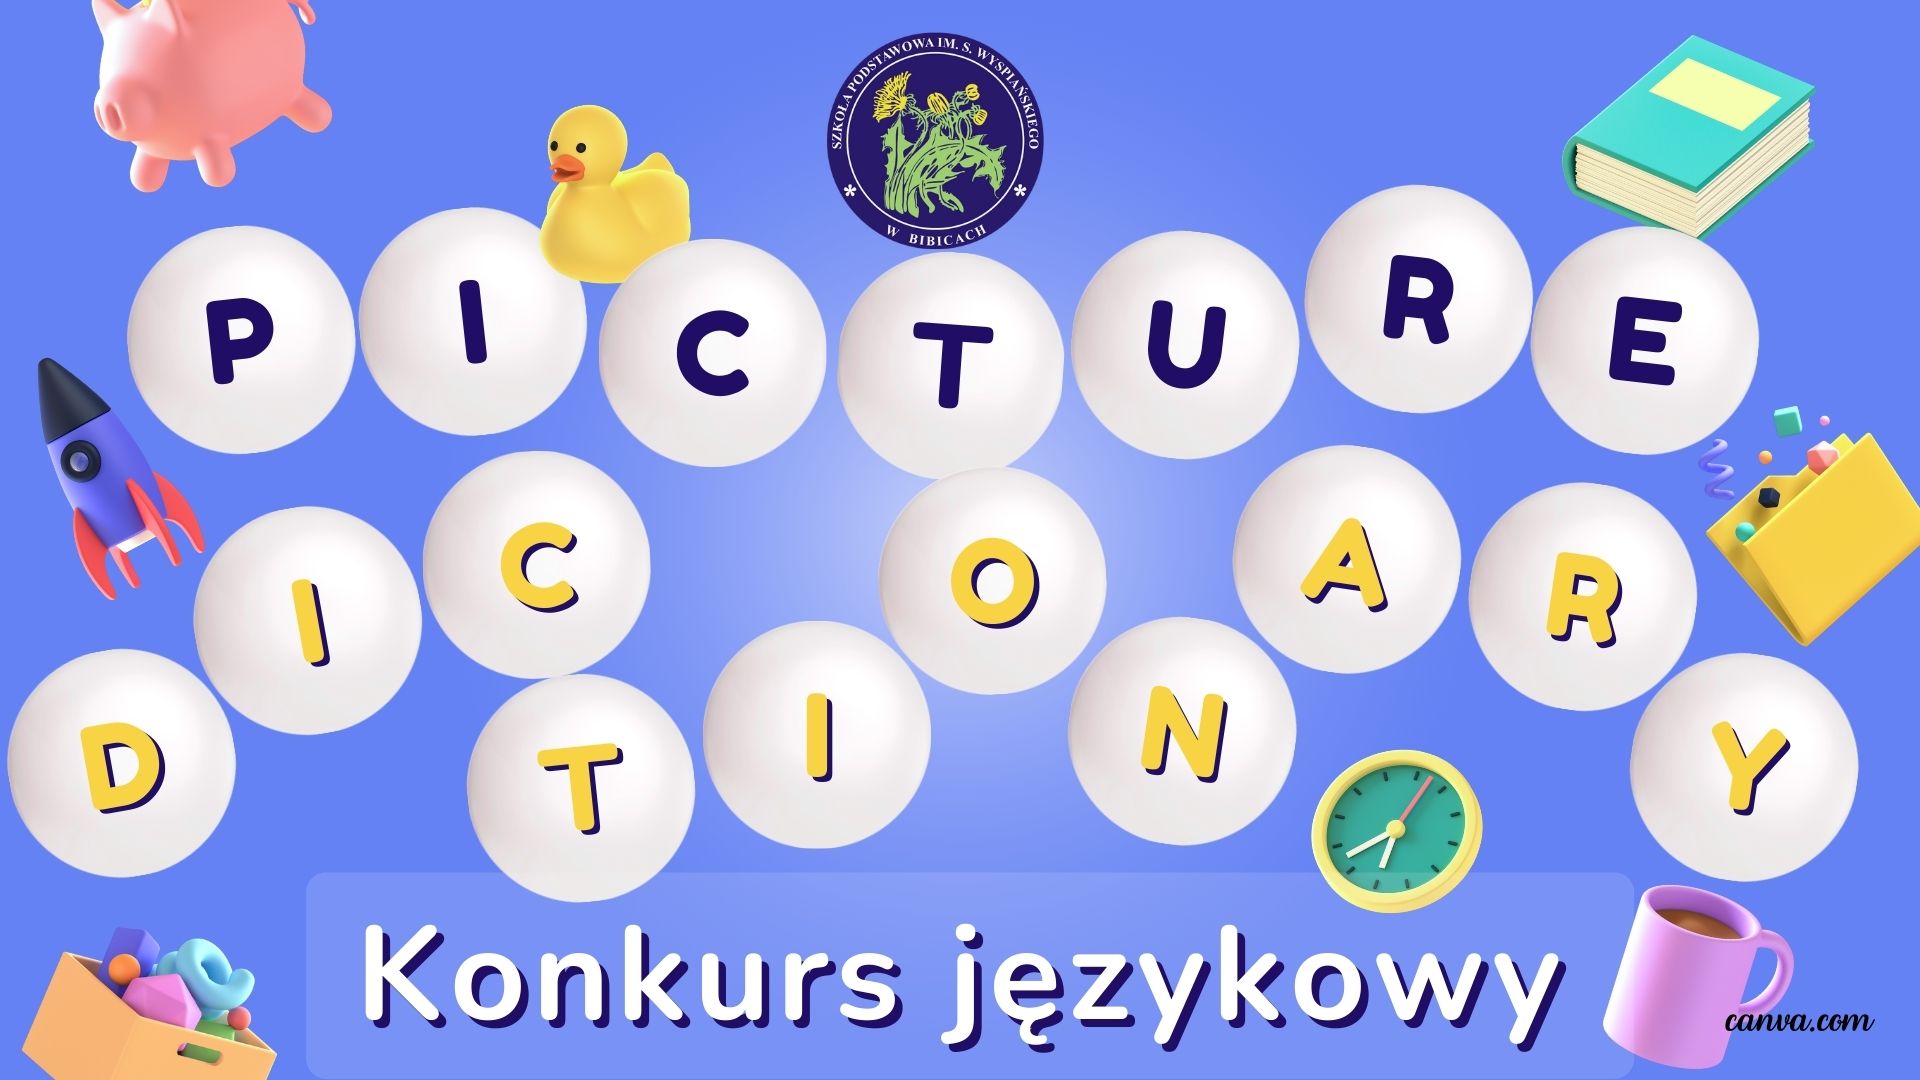 Konkurs językowy "Picture dictionary"